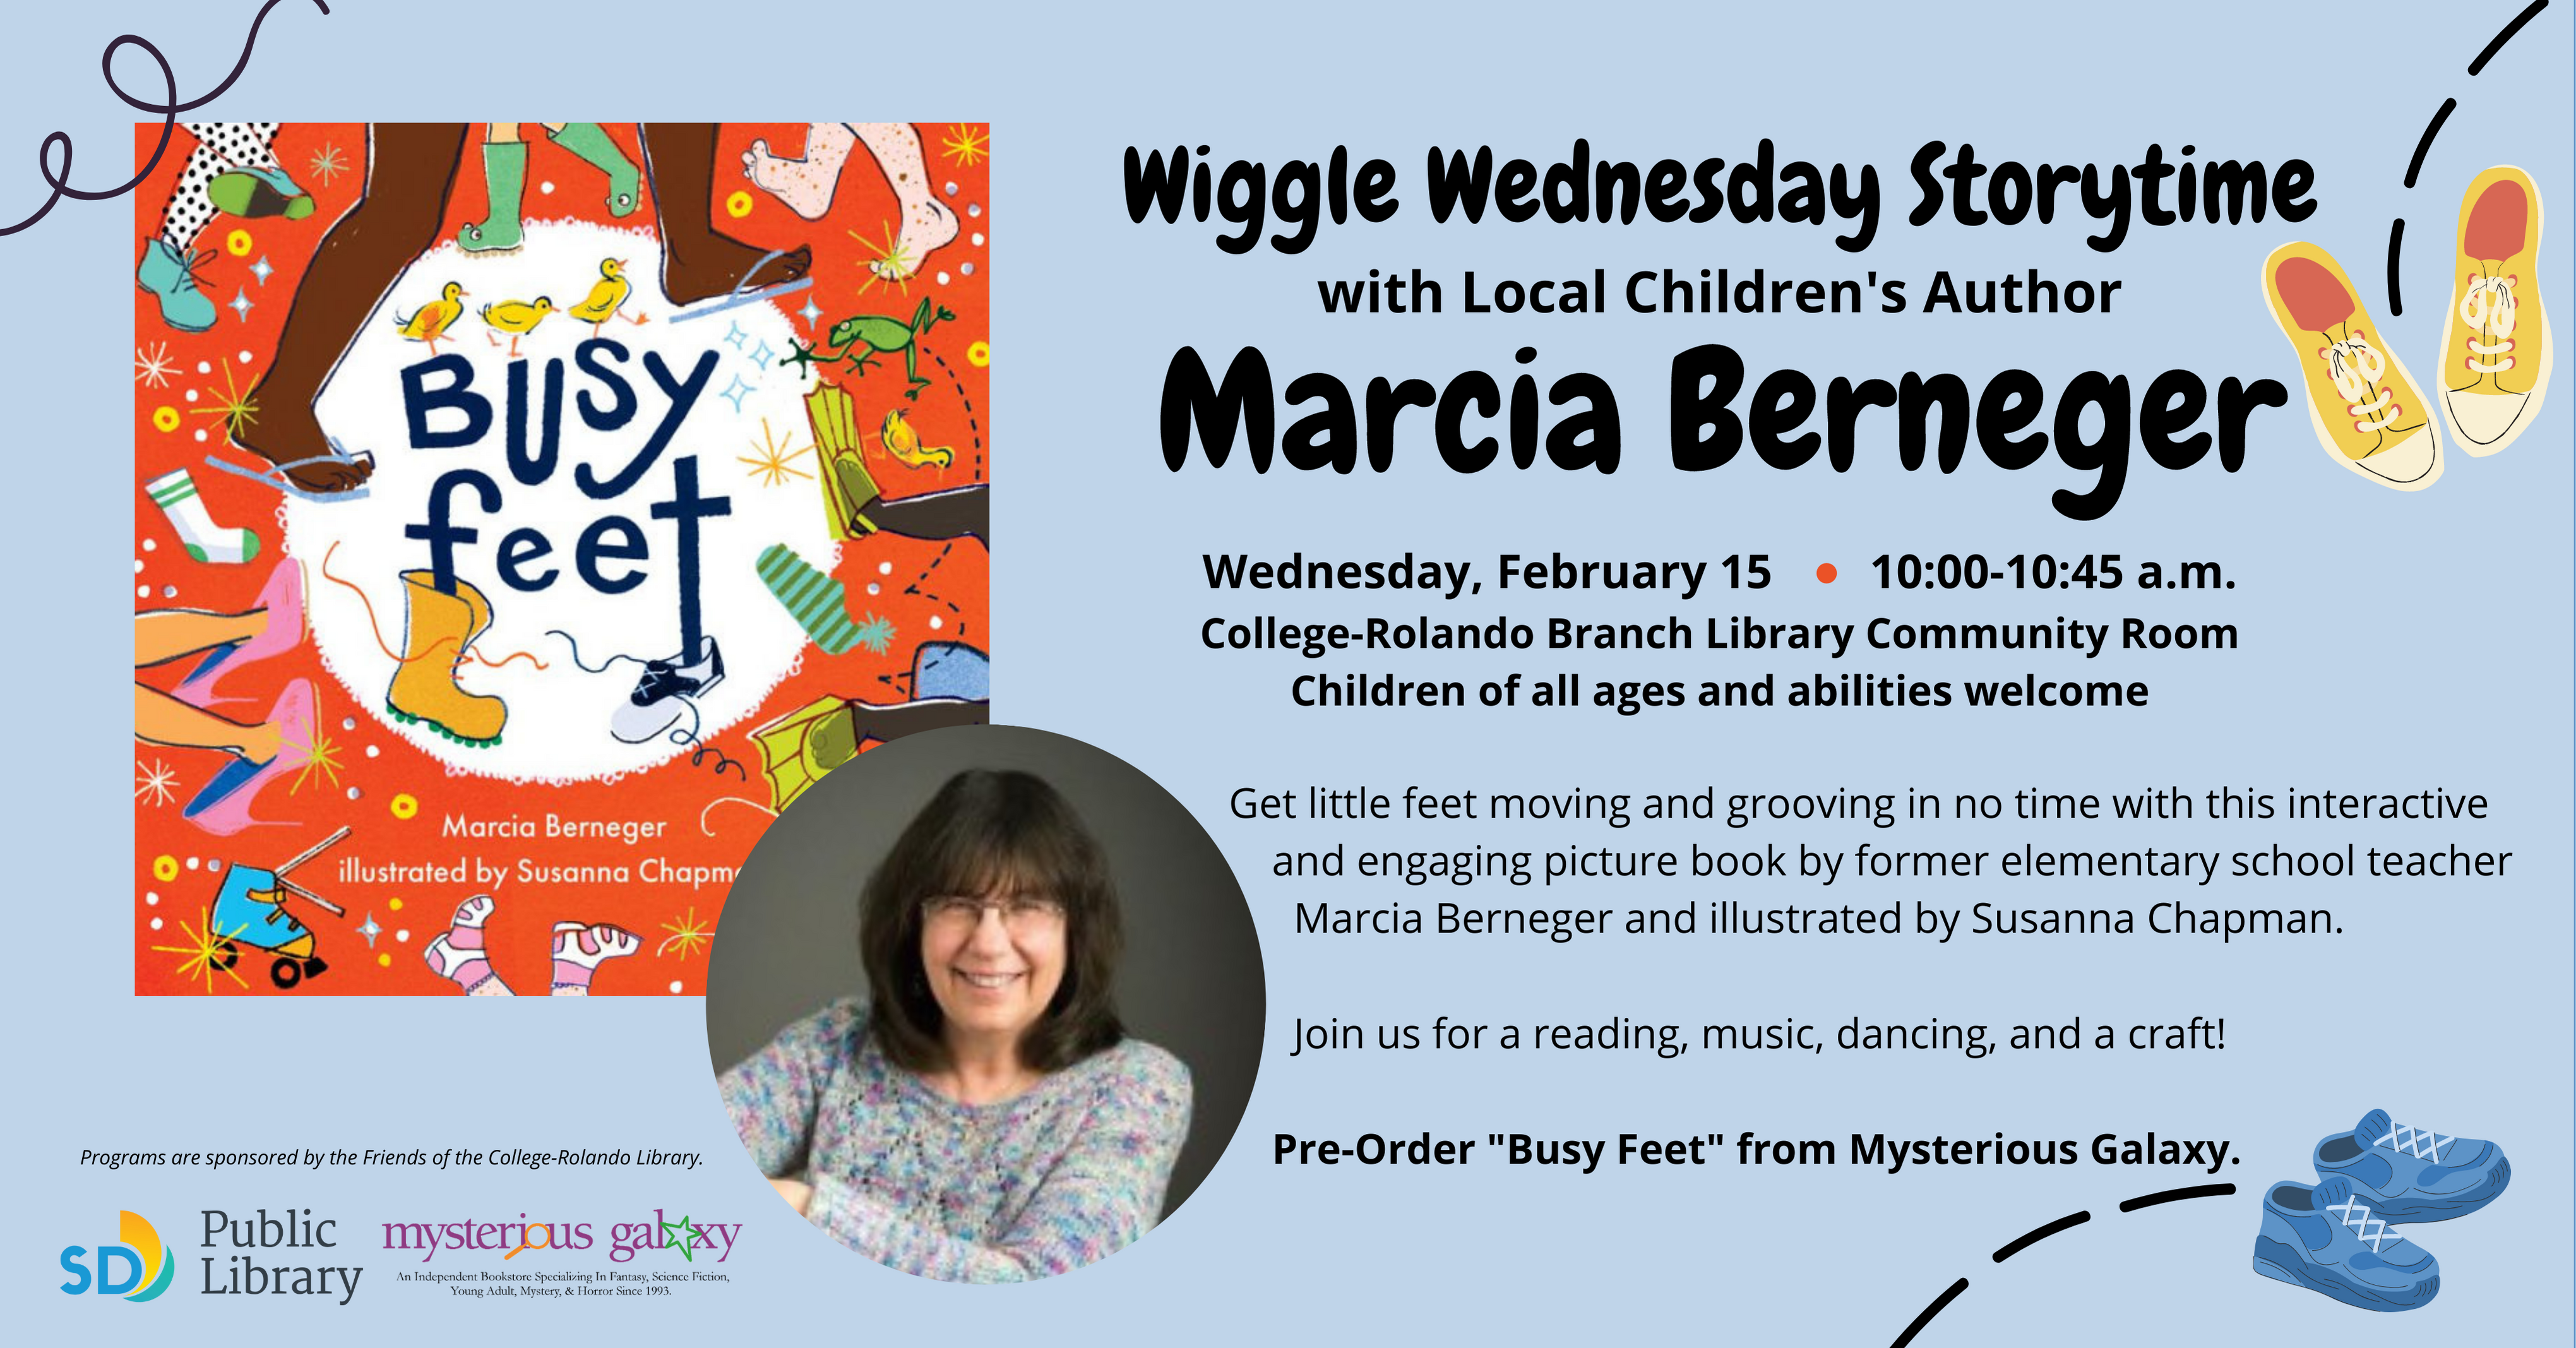 .      Get little feet moving and grooving in no time with this interactive .          and engaging picture book by former elementary school teacher .            Marcia Berneger and illustrated by Susanna Chapman.  .            Join us for a reading, music, dancing, and a craft!  .          Pre-Order "Busy Feet" from Mysterious Galaxy. 